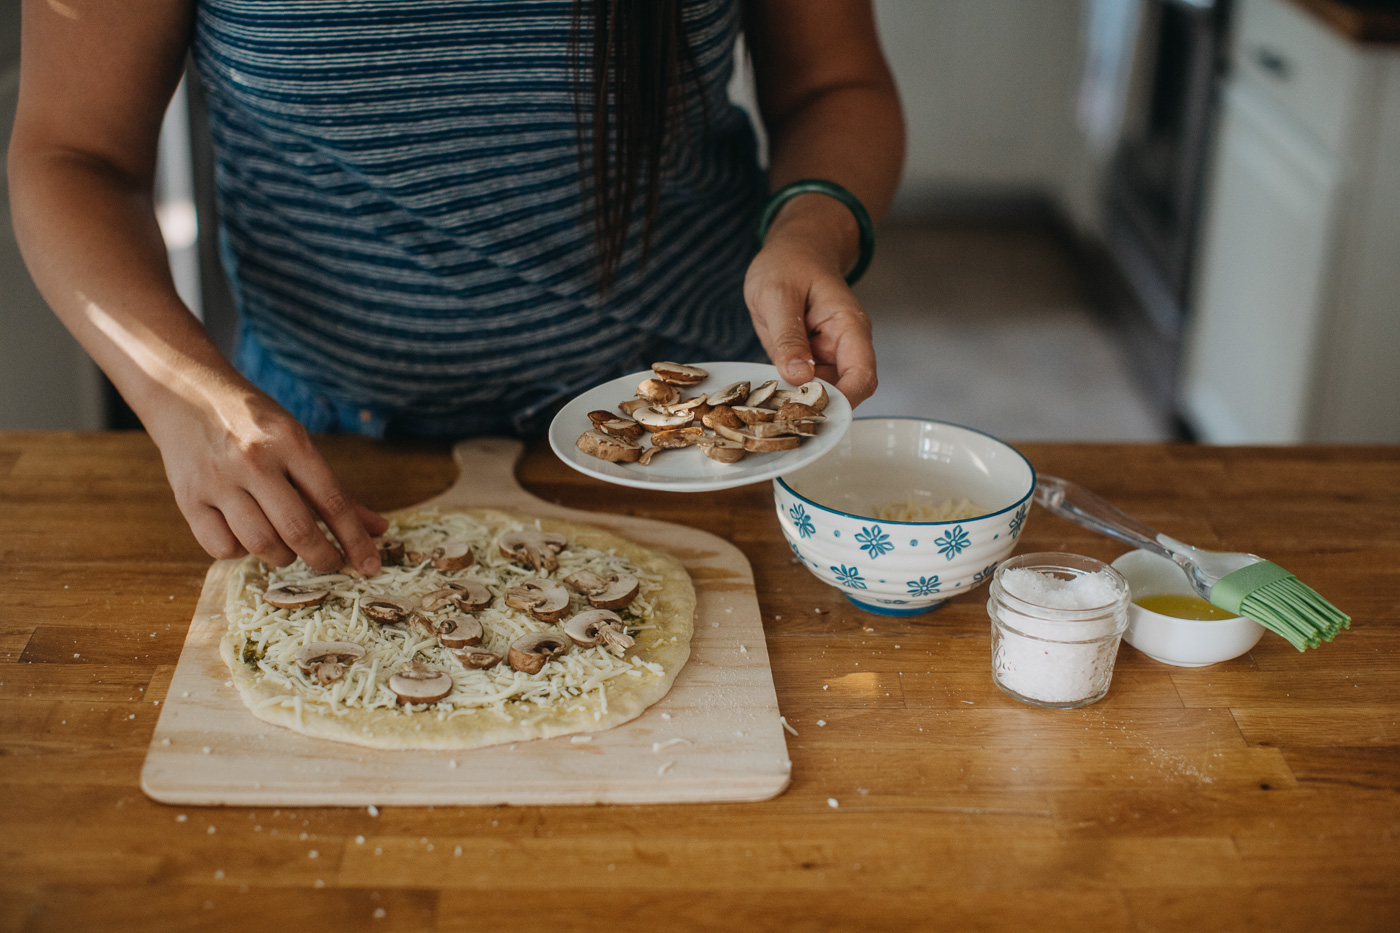 woman in blue shirt showing how to make homemade pizza for pizza night by adding thinly sliced mushrooms to homemade pizza.